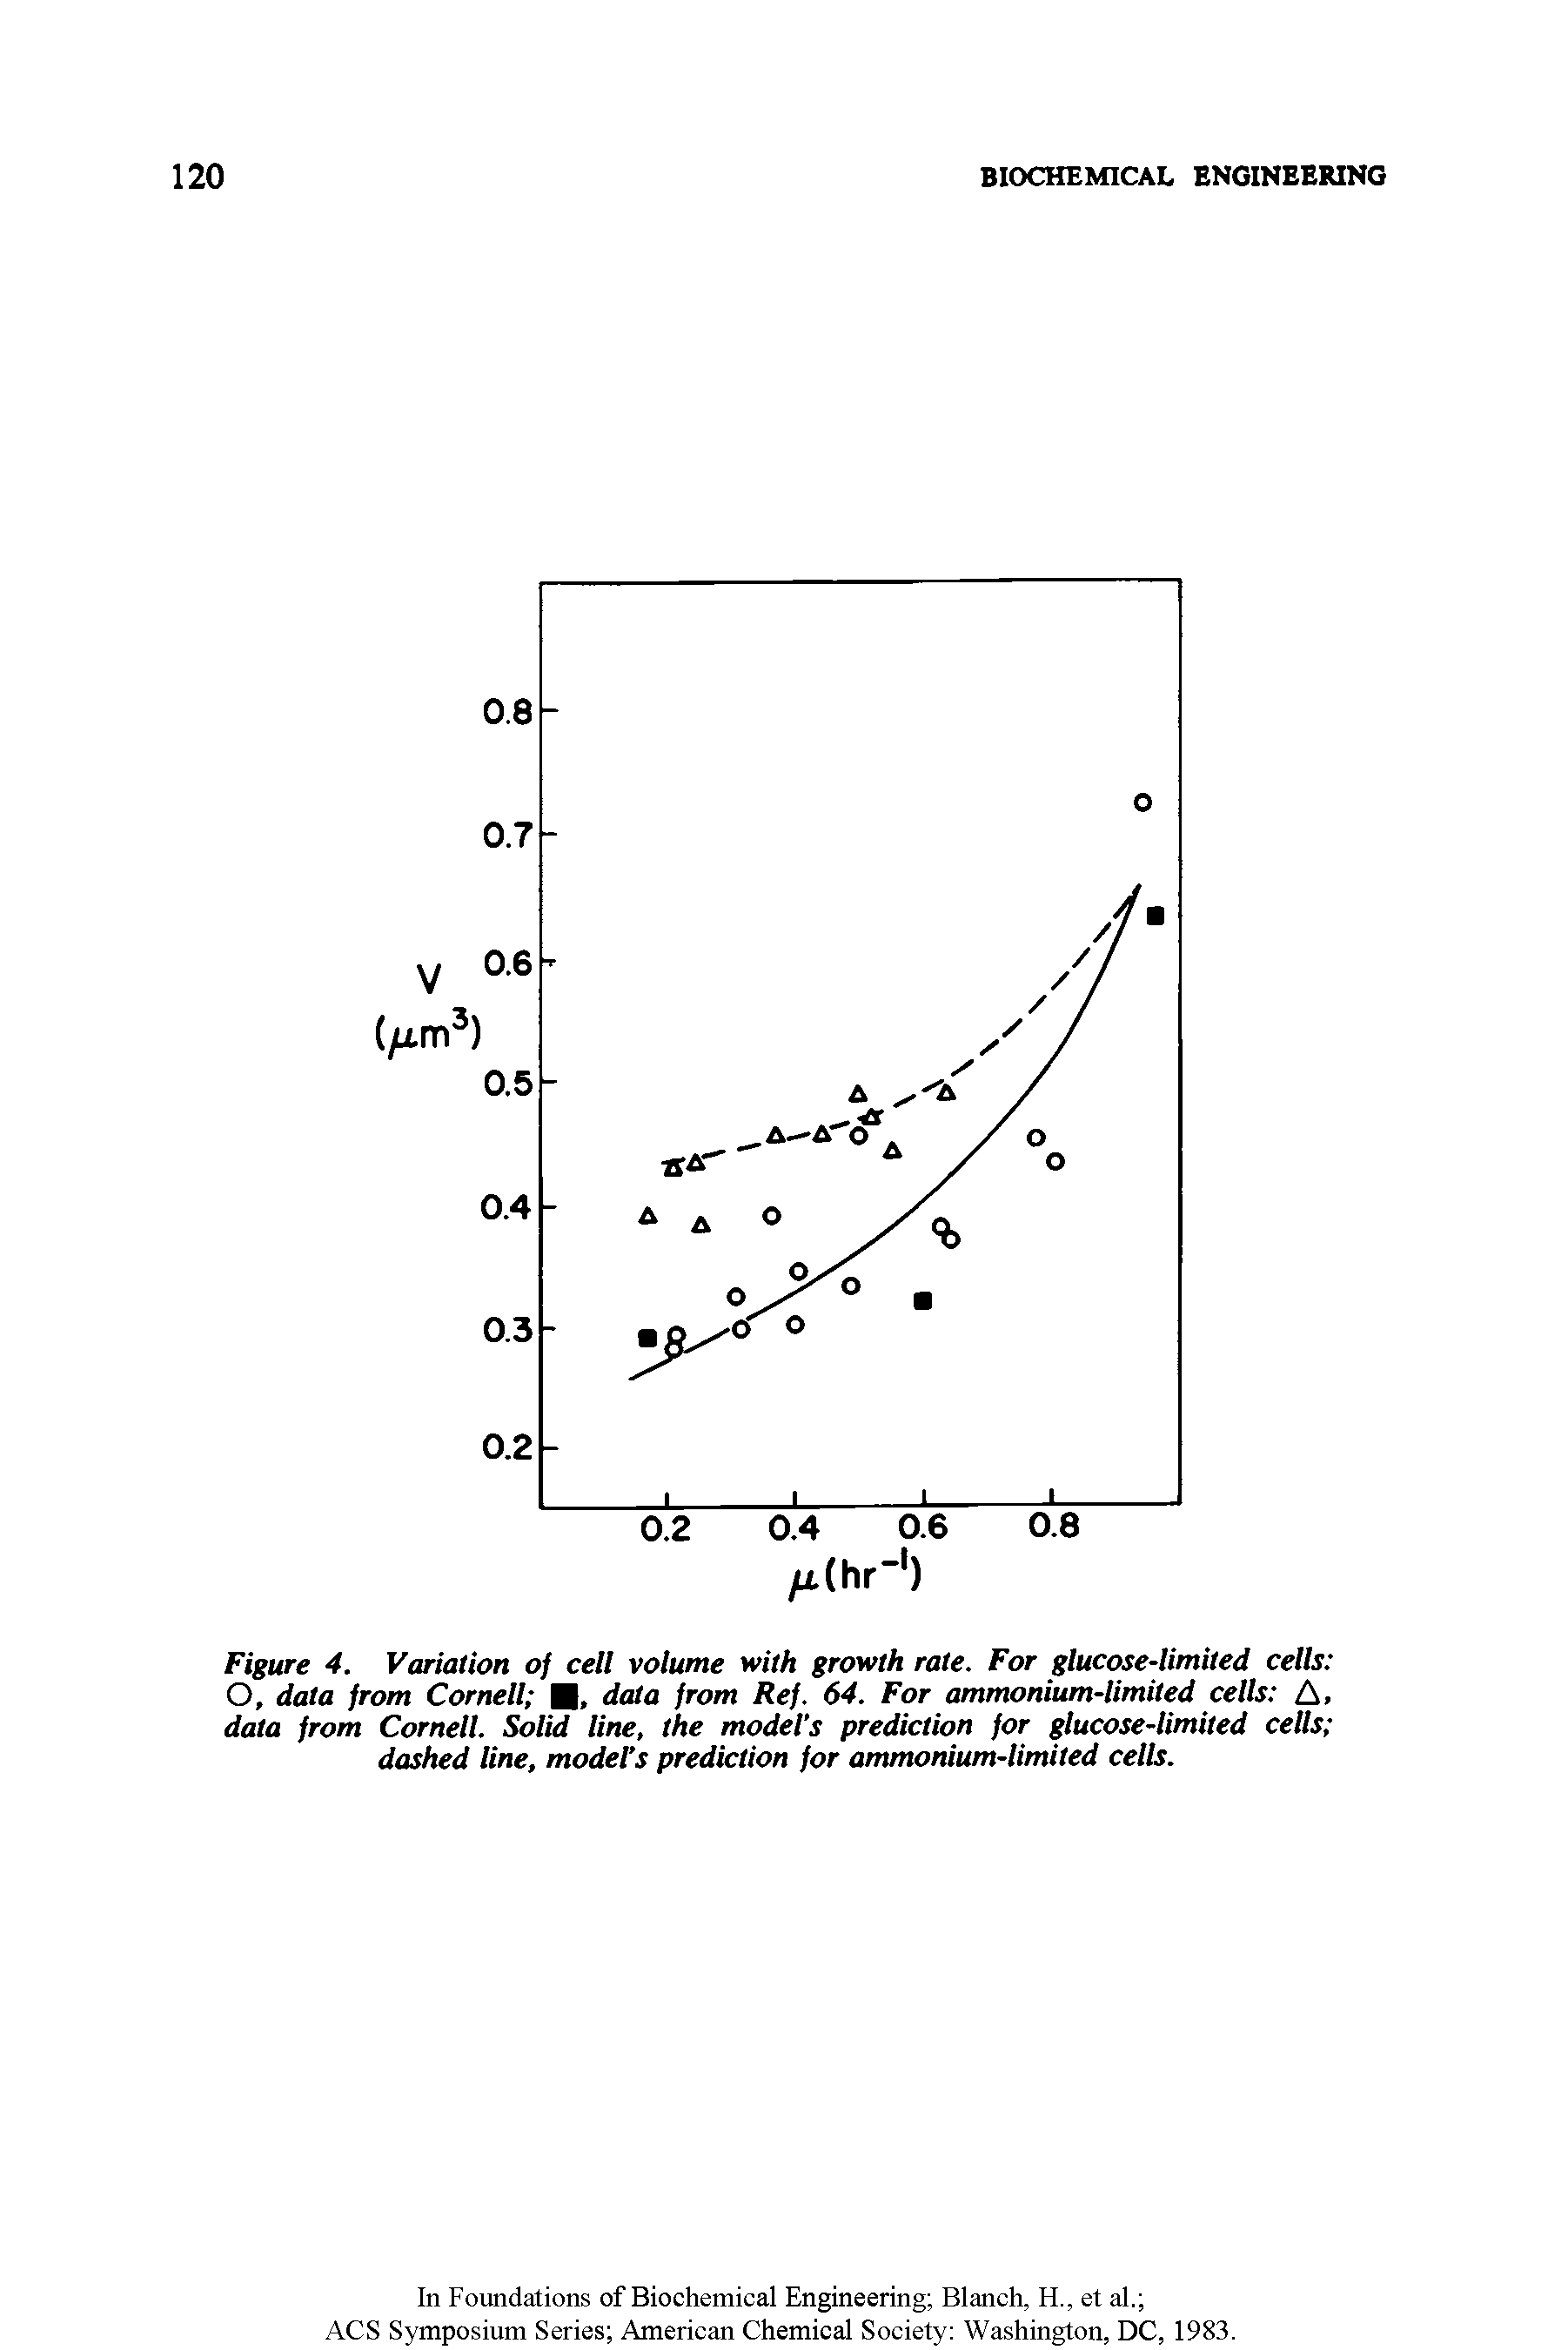 Figure 4. Variation of cell volume with growth rate. For glucose-limited cells O, data from Cornell , data from Ref. 64. For ammonium-limited cells A. data from Cornell. Solid line, the model s prediction for glucose-limited cells dashed line, models prediction for ammonium-limited cells.